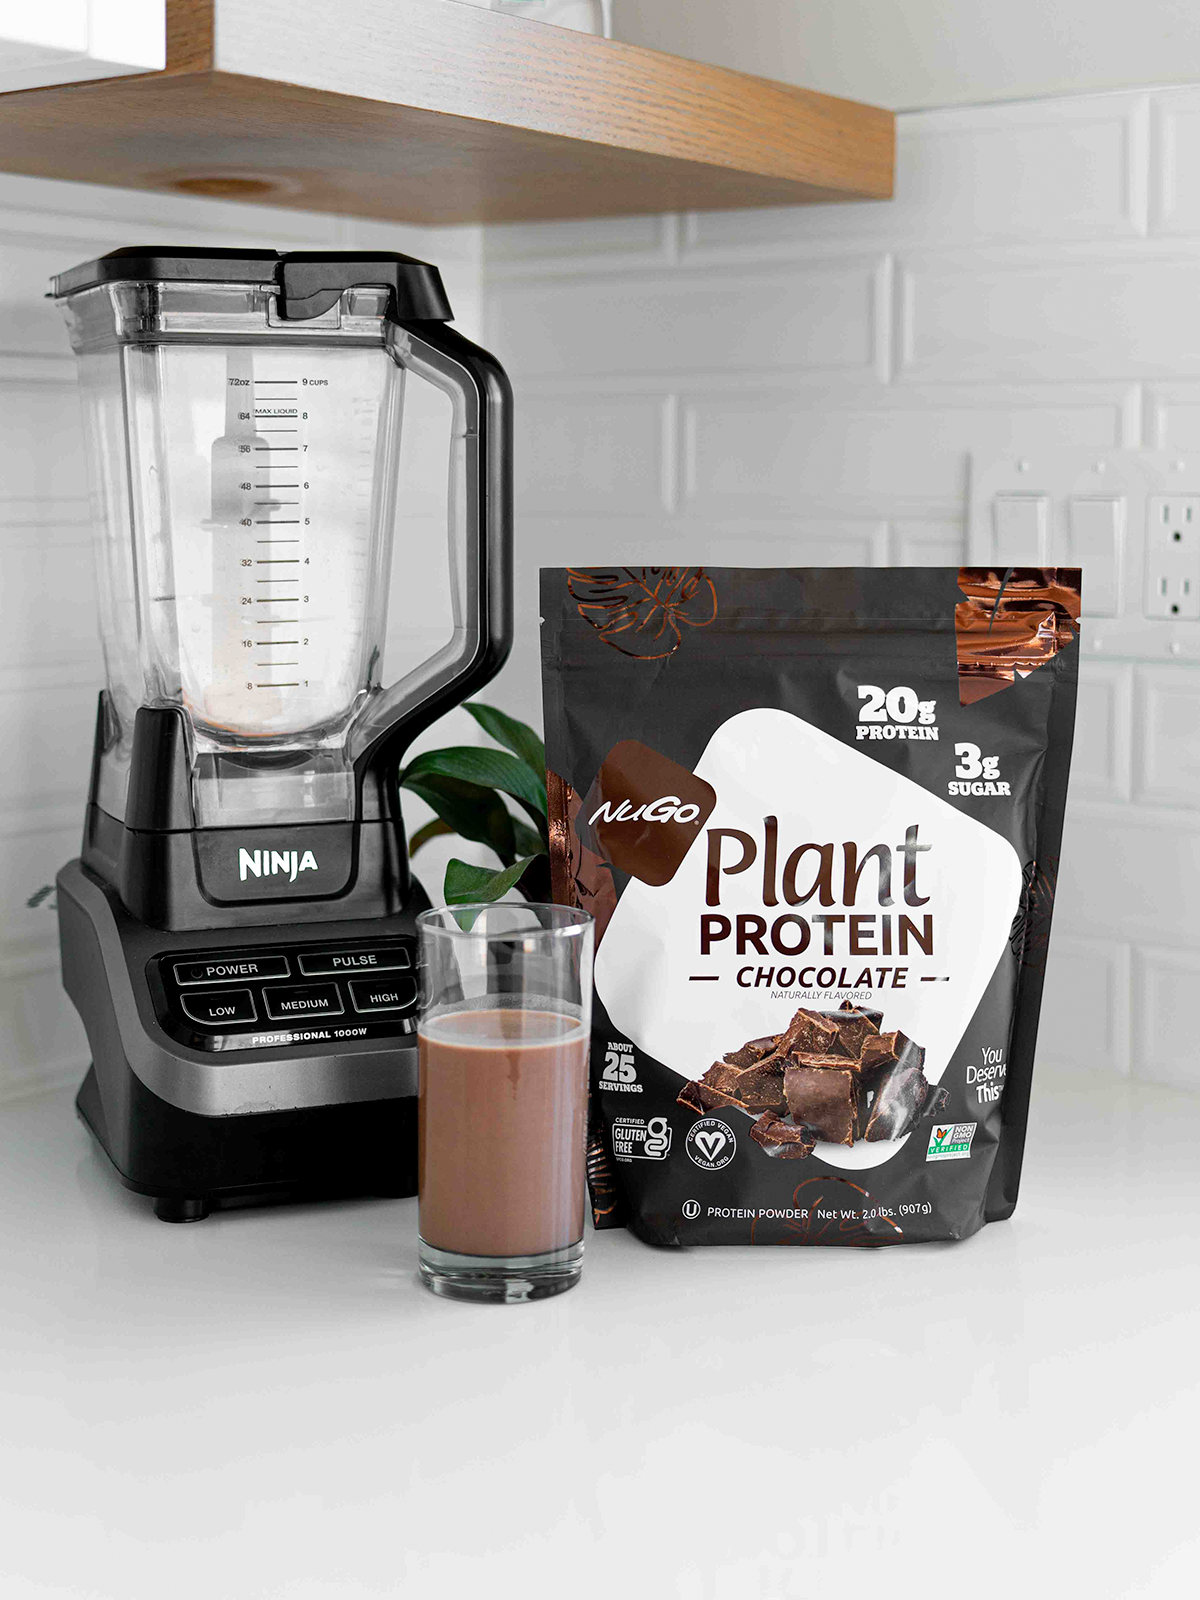 A bag of Chocoalte NuGo Protein Powder next to a blender and glass of it mixed